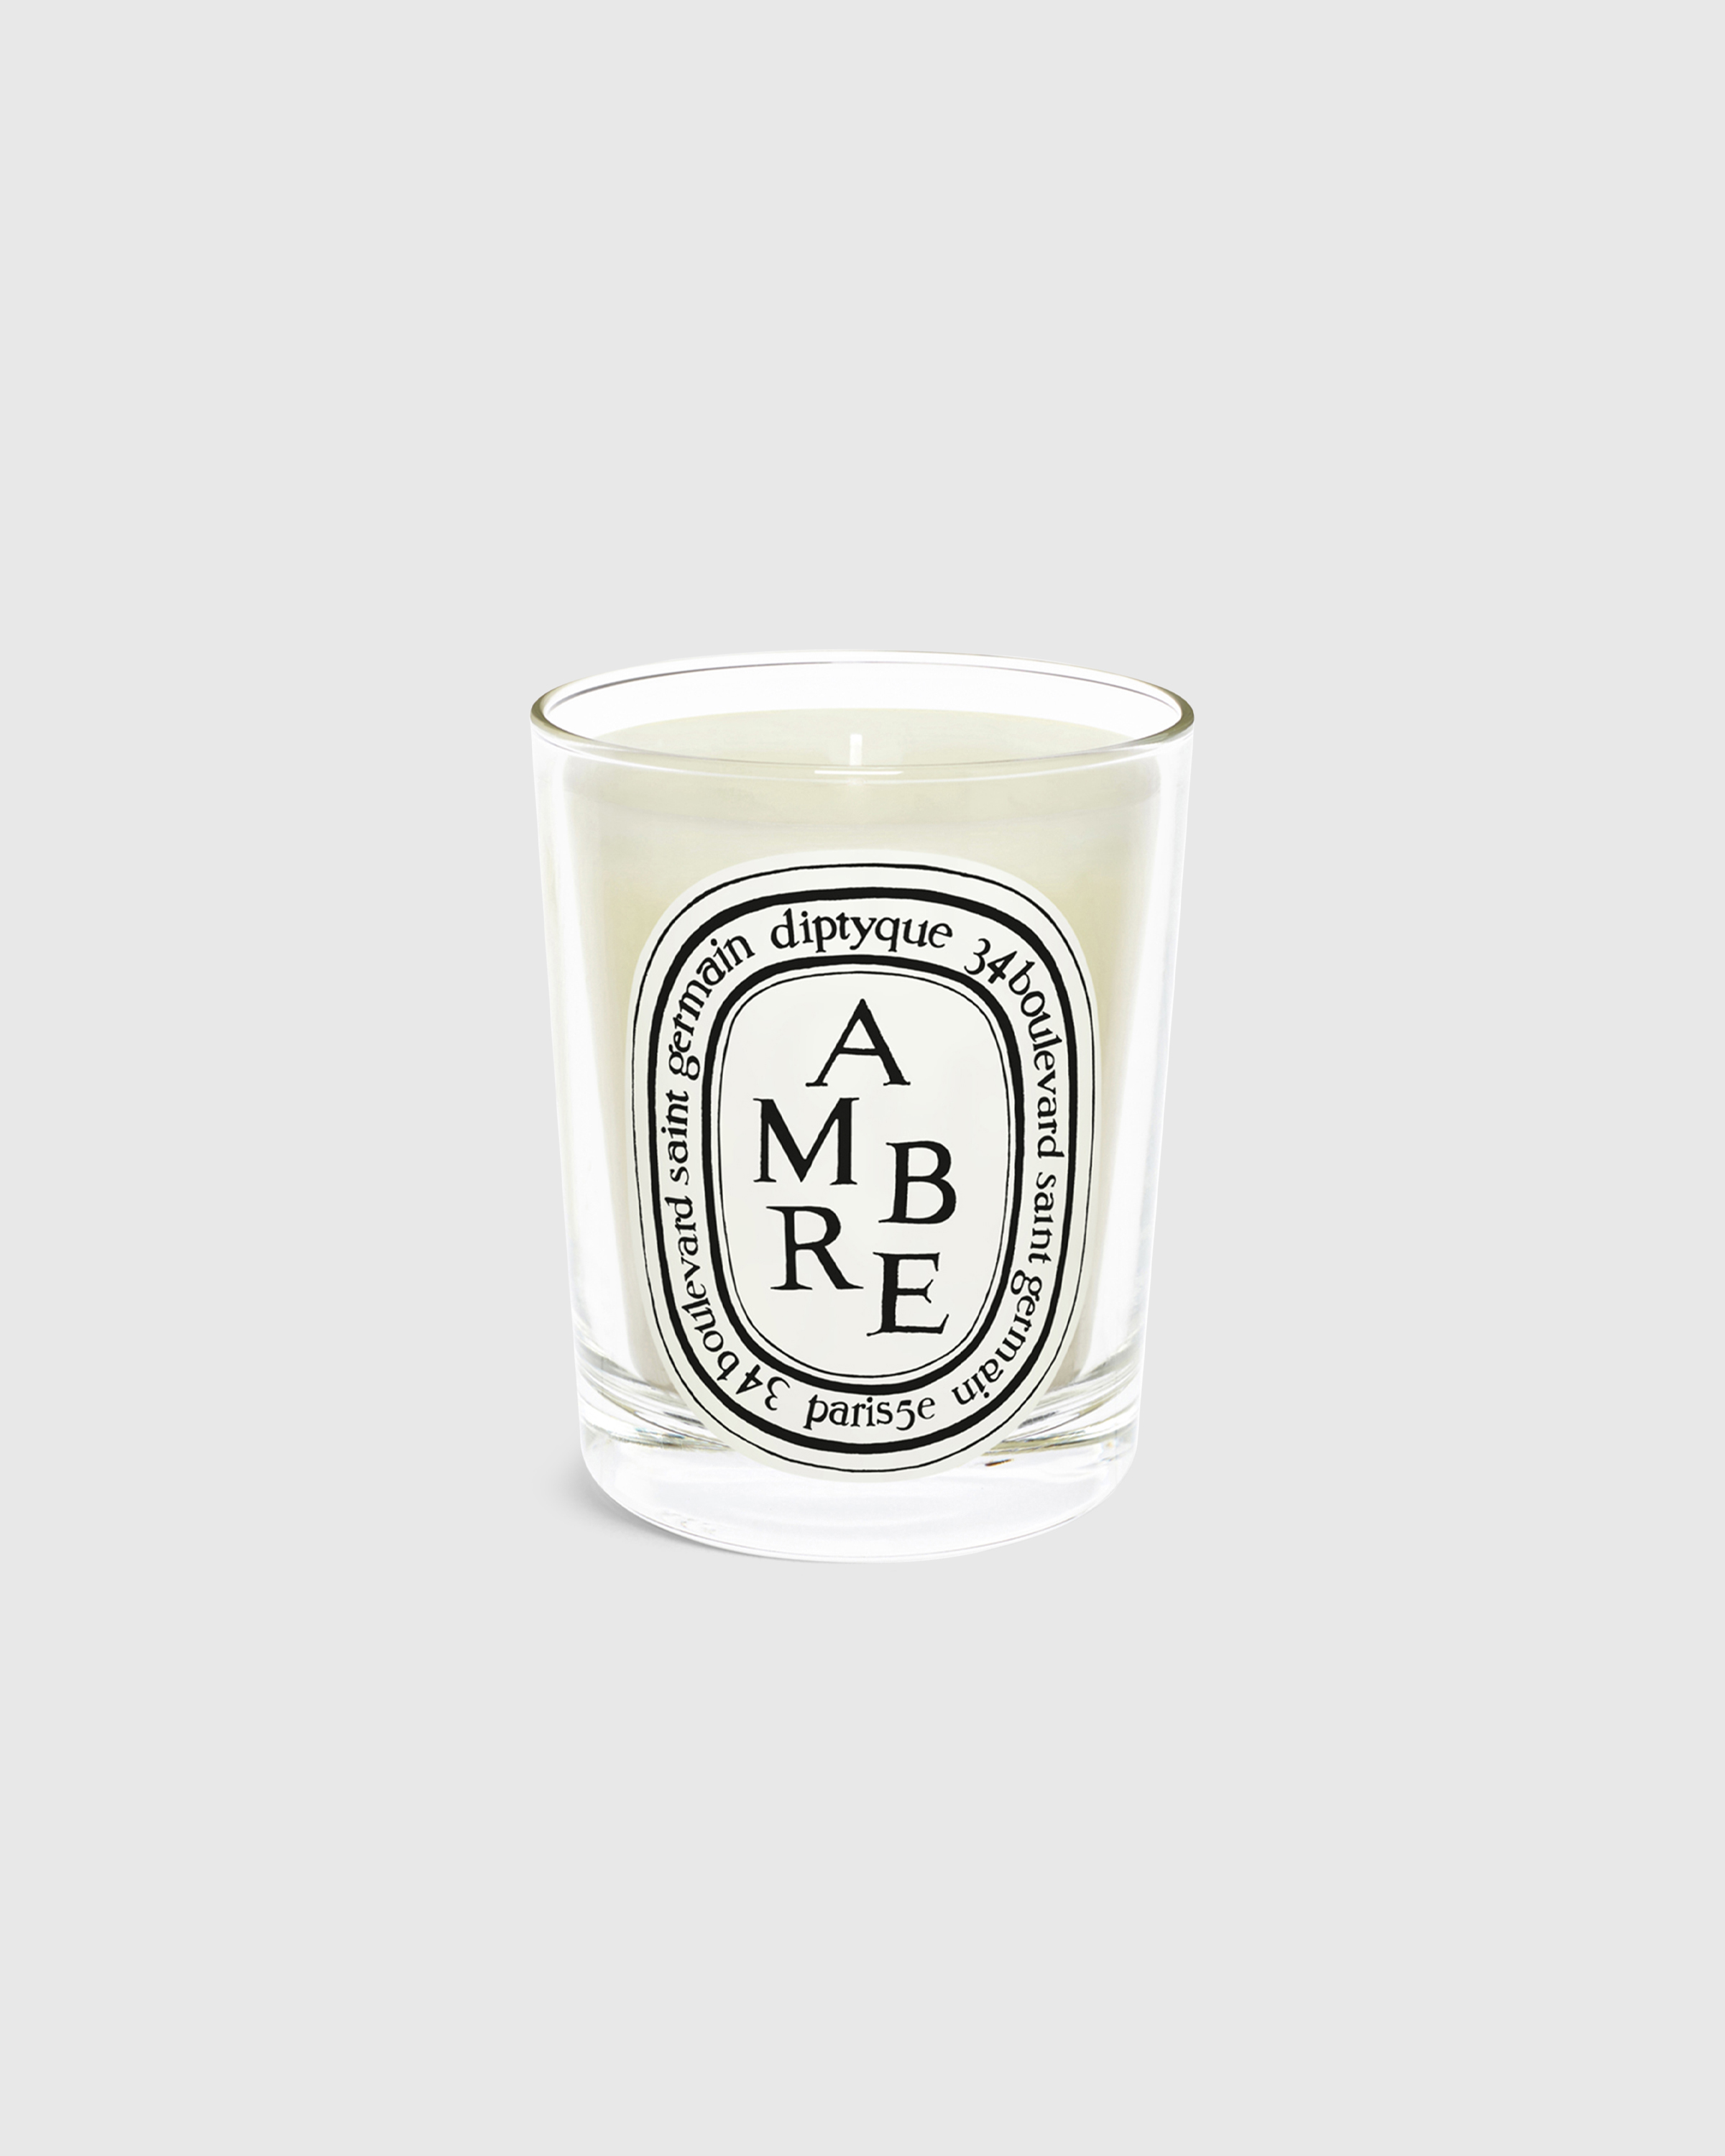 Diptyque – Standard Candle Ambre 190g - Candles & Fragrances - White - Image 1